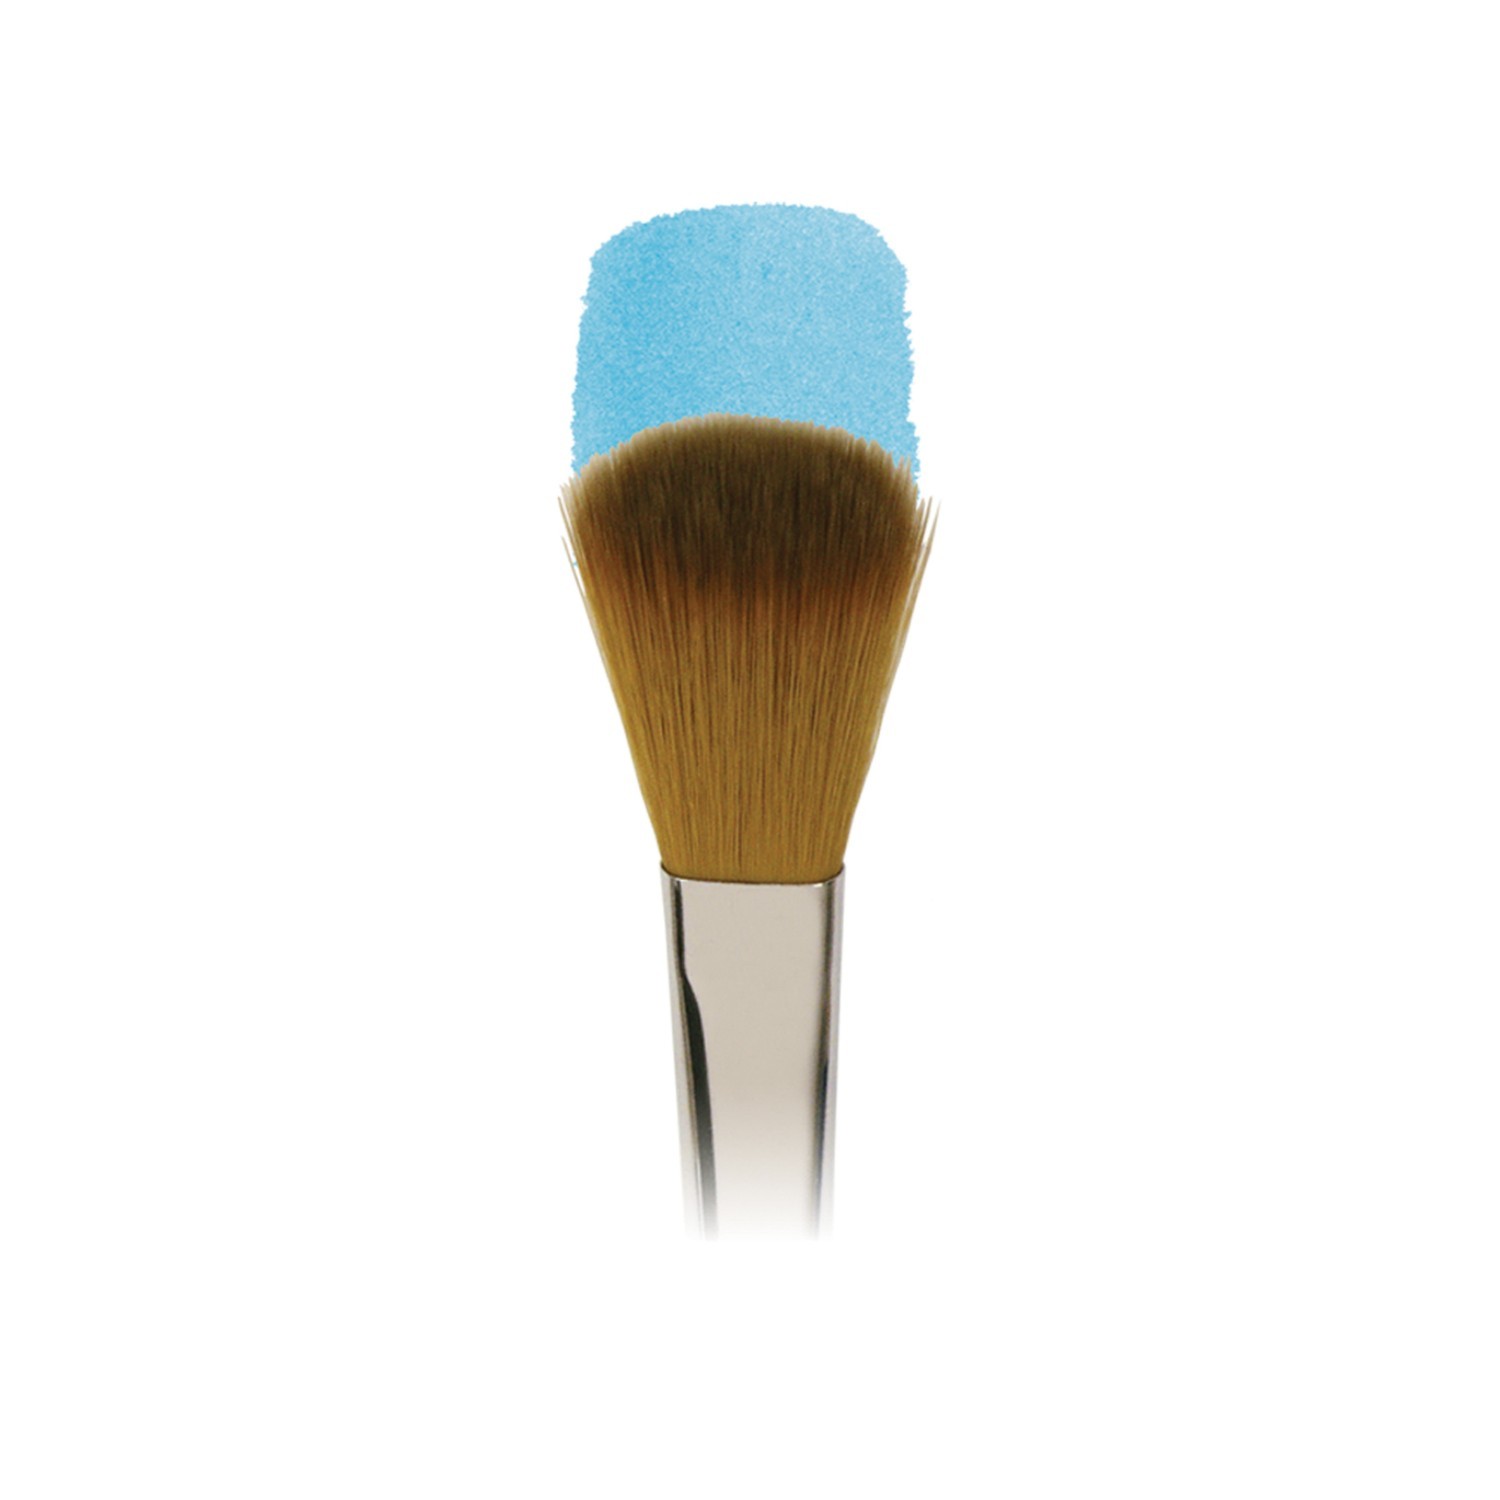 Winsor and Newton Cotman Watercolour Mop Brush - Blue / 3/4 inch Image 2